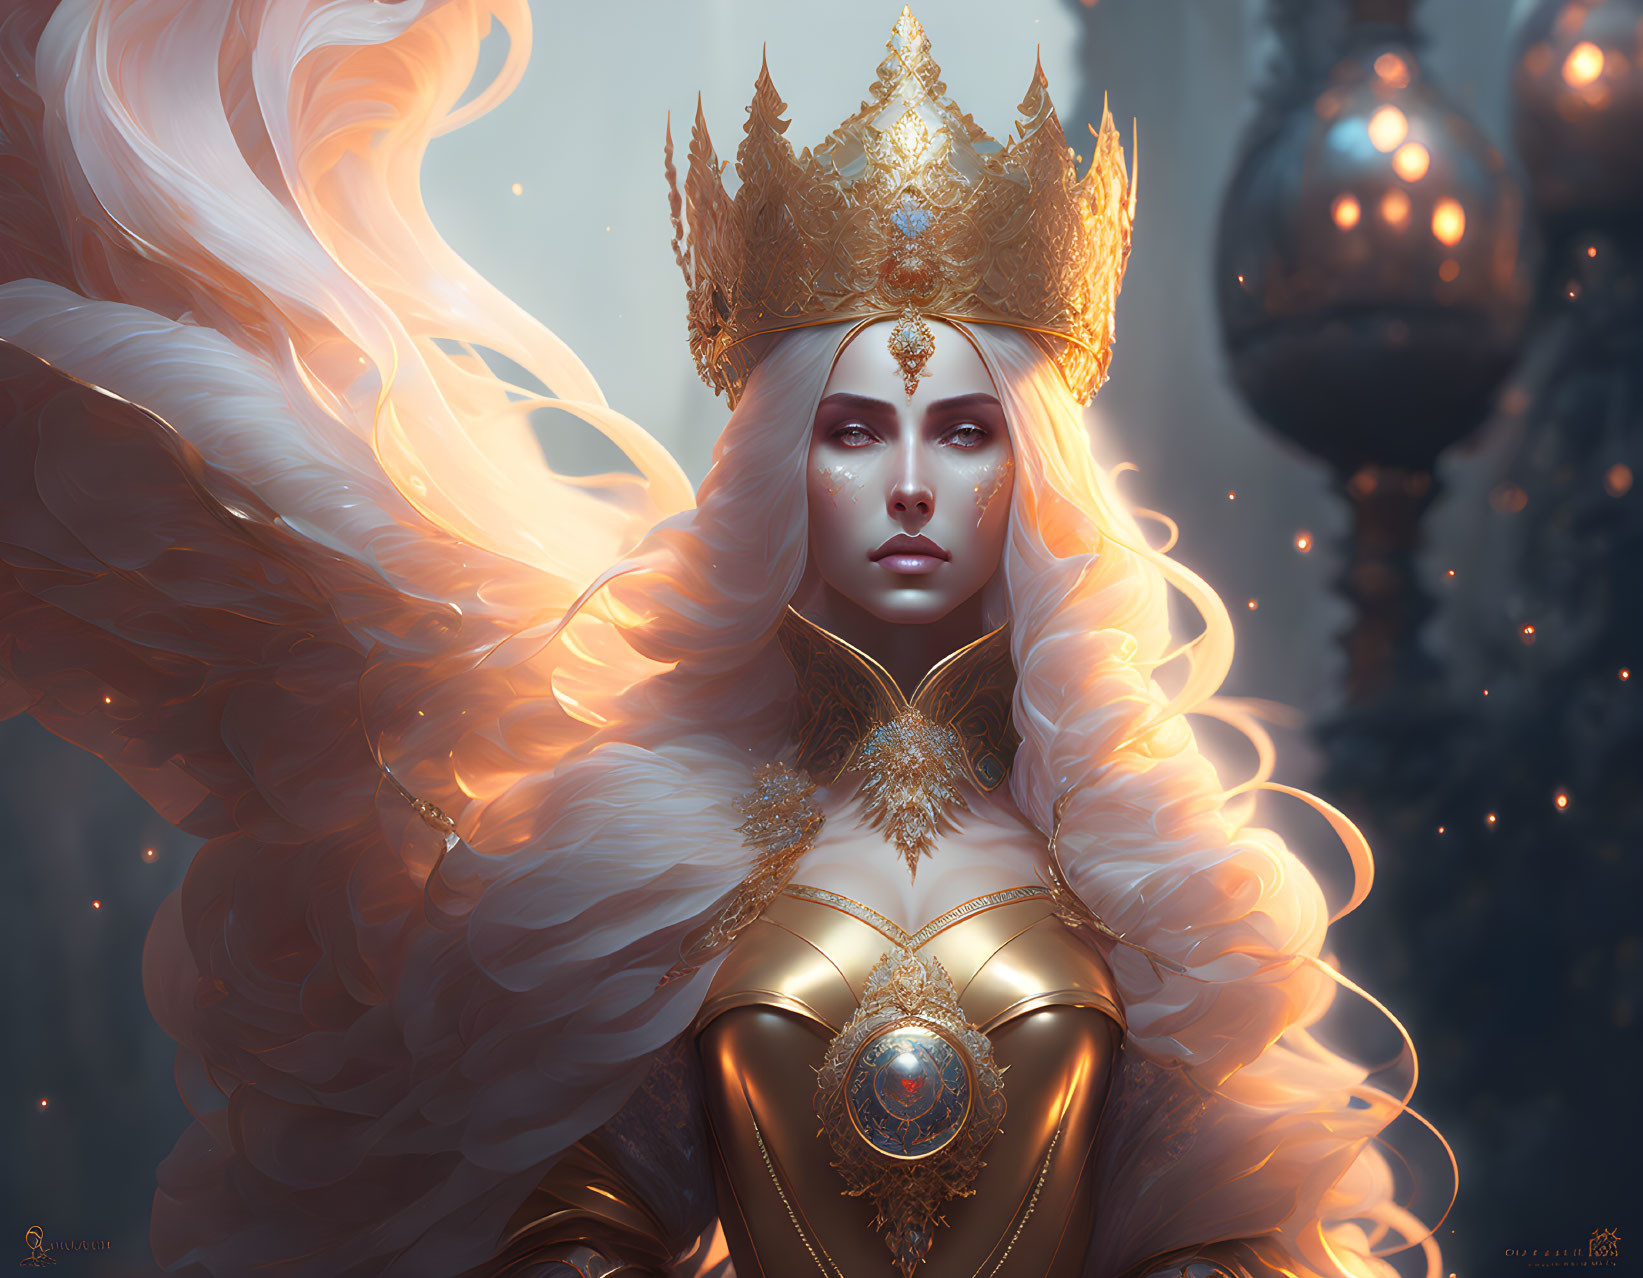 Regal figure with white hair, golden crown, and mystical gem in ethereal forest